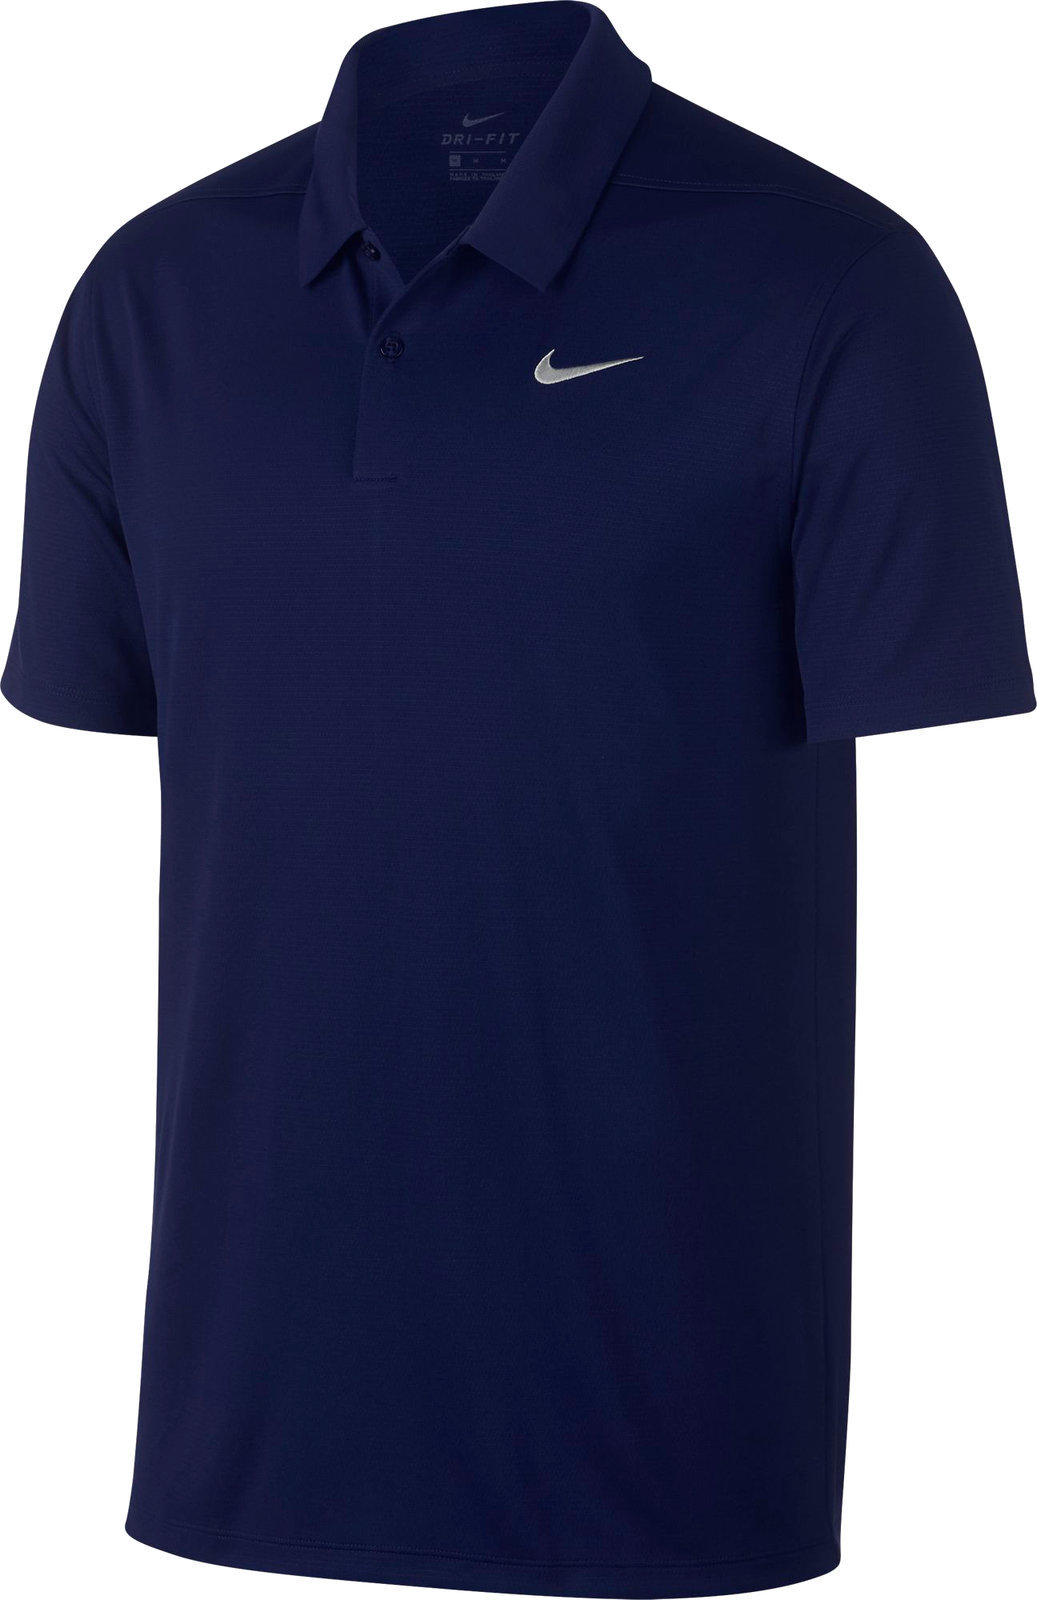 Риза за поло Nike Dry Essential Solid Blue Void/Flat Silver XL